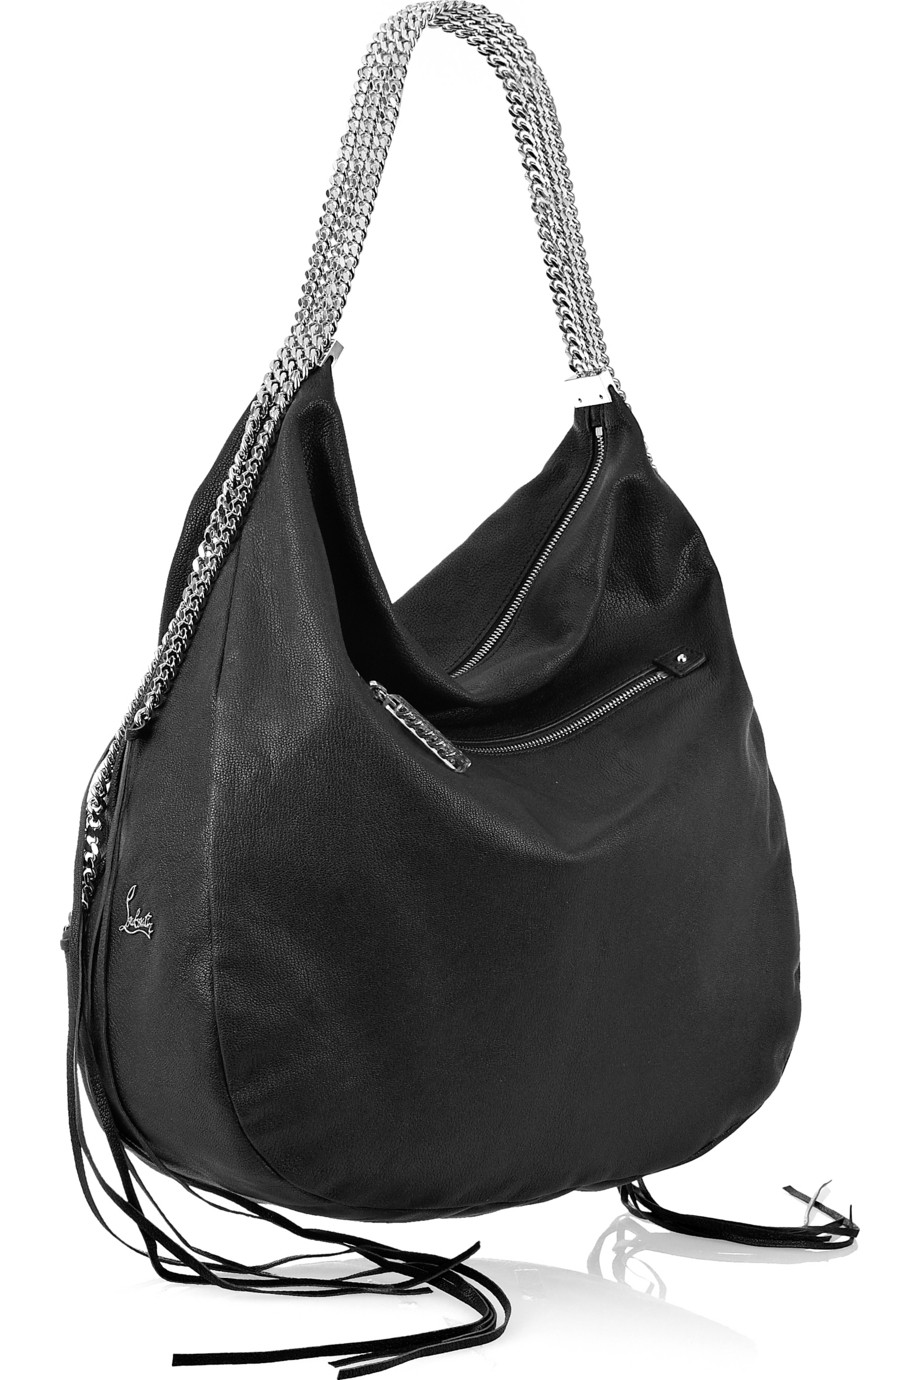 Christian Louboutin Marianna Rider Leather Hobo Bag in Black - Lyst